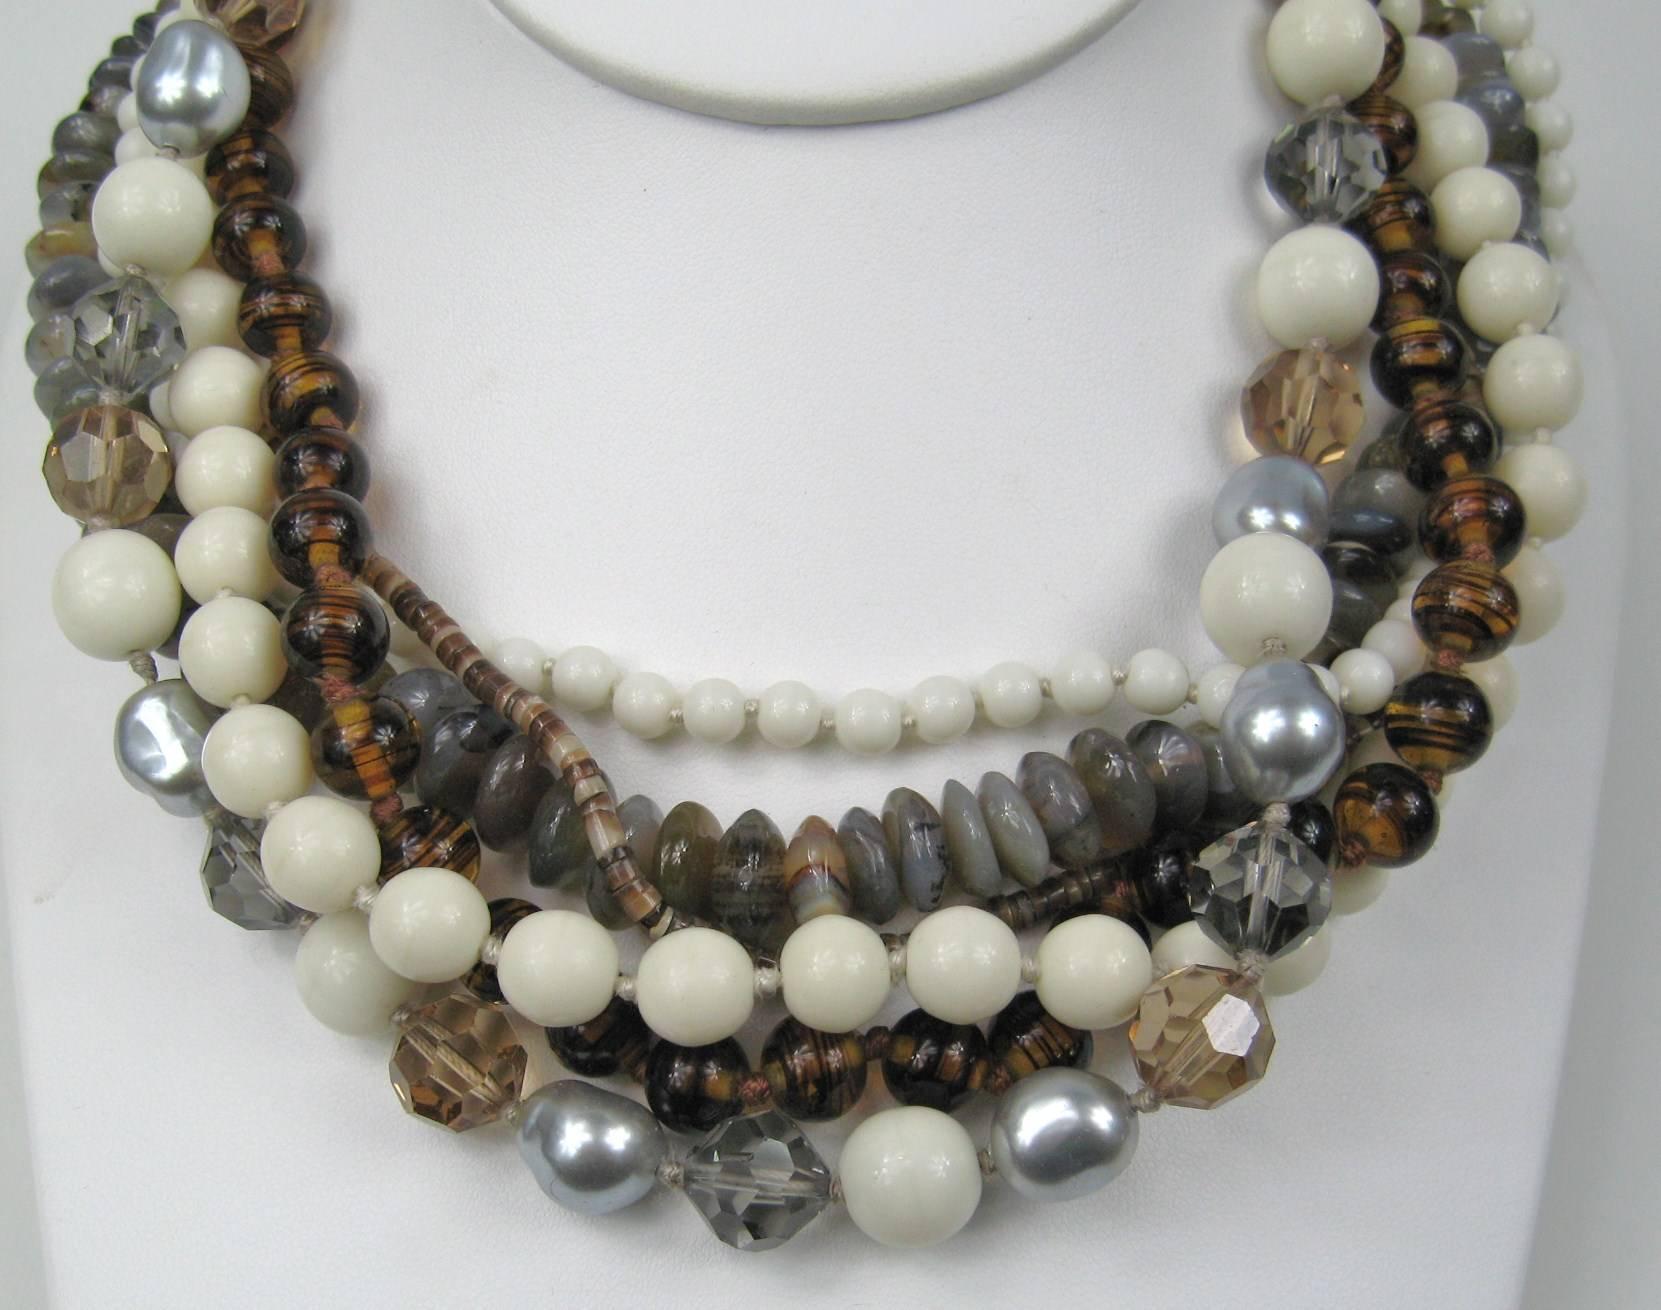 This is stunning in person, faceted crystal, glass and stone beading make up this 6 strand Ciner New old stock necklace. Measures 19 inches end to end. Visit our store front for hundreds of designer costume jewelry as well as sterling silver. Be